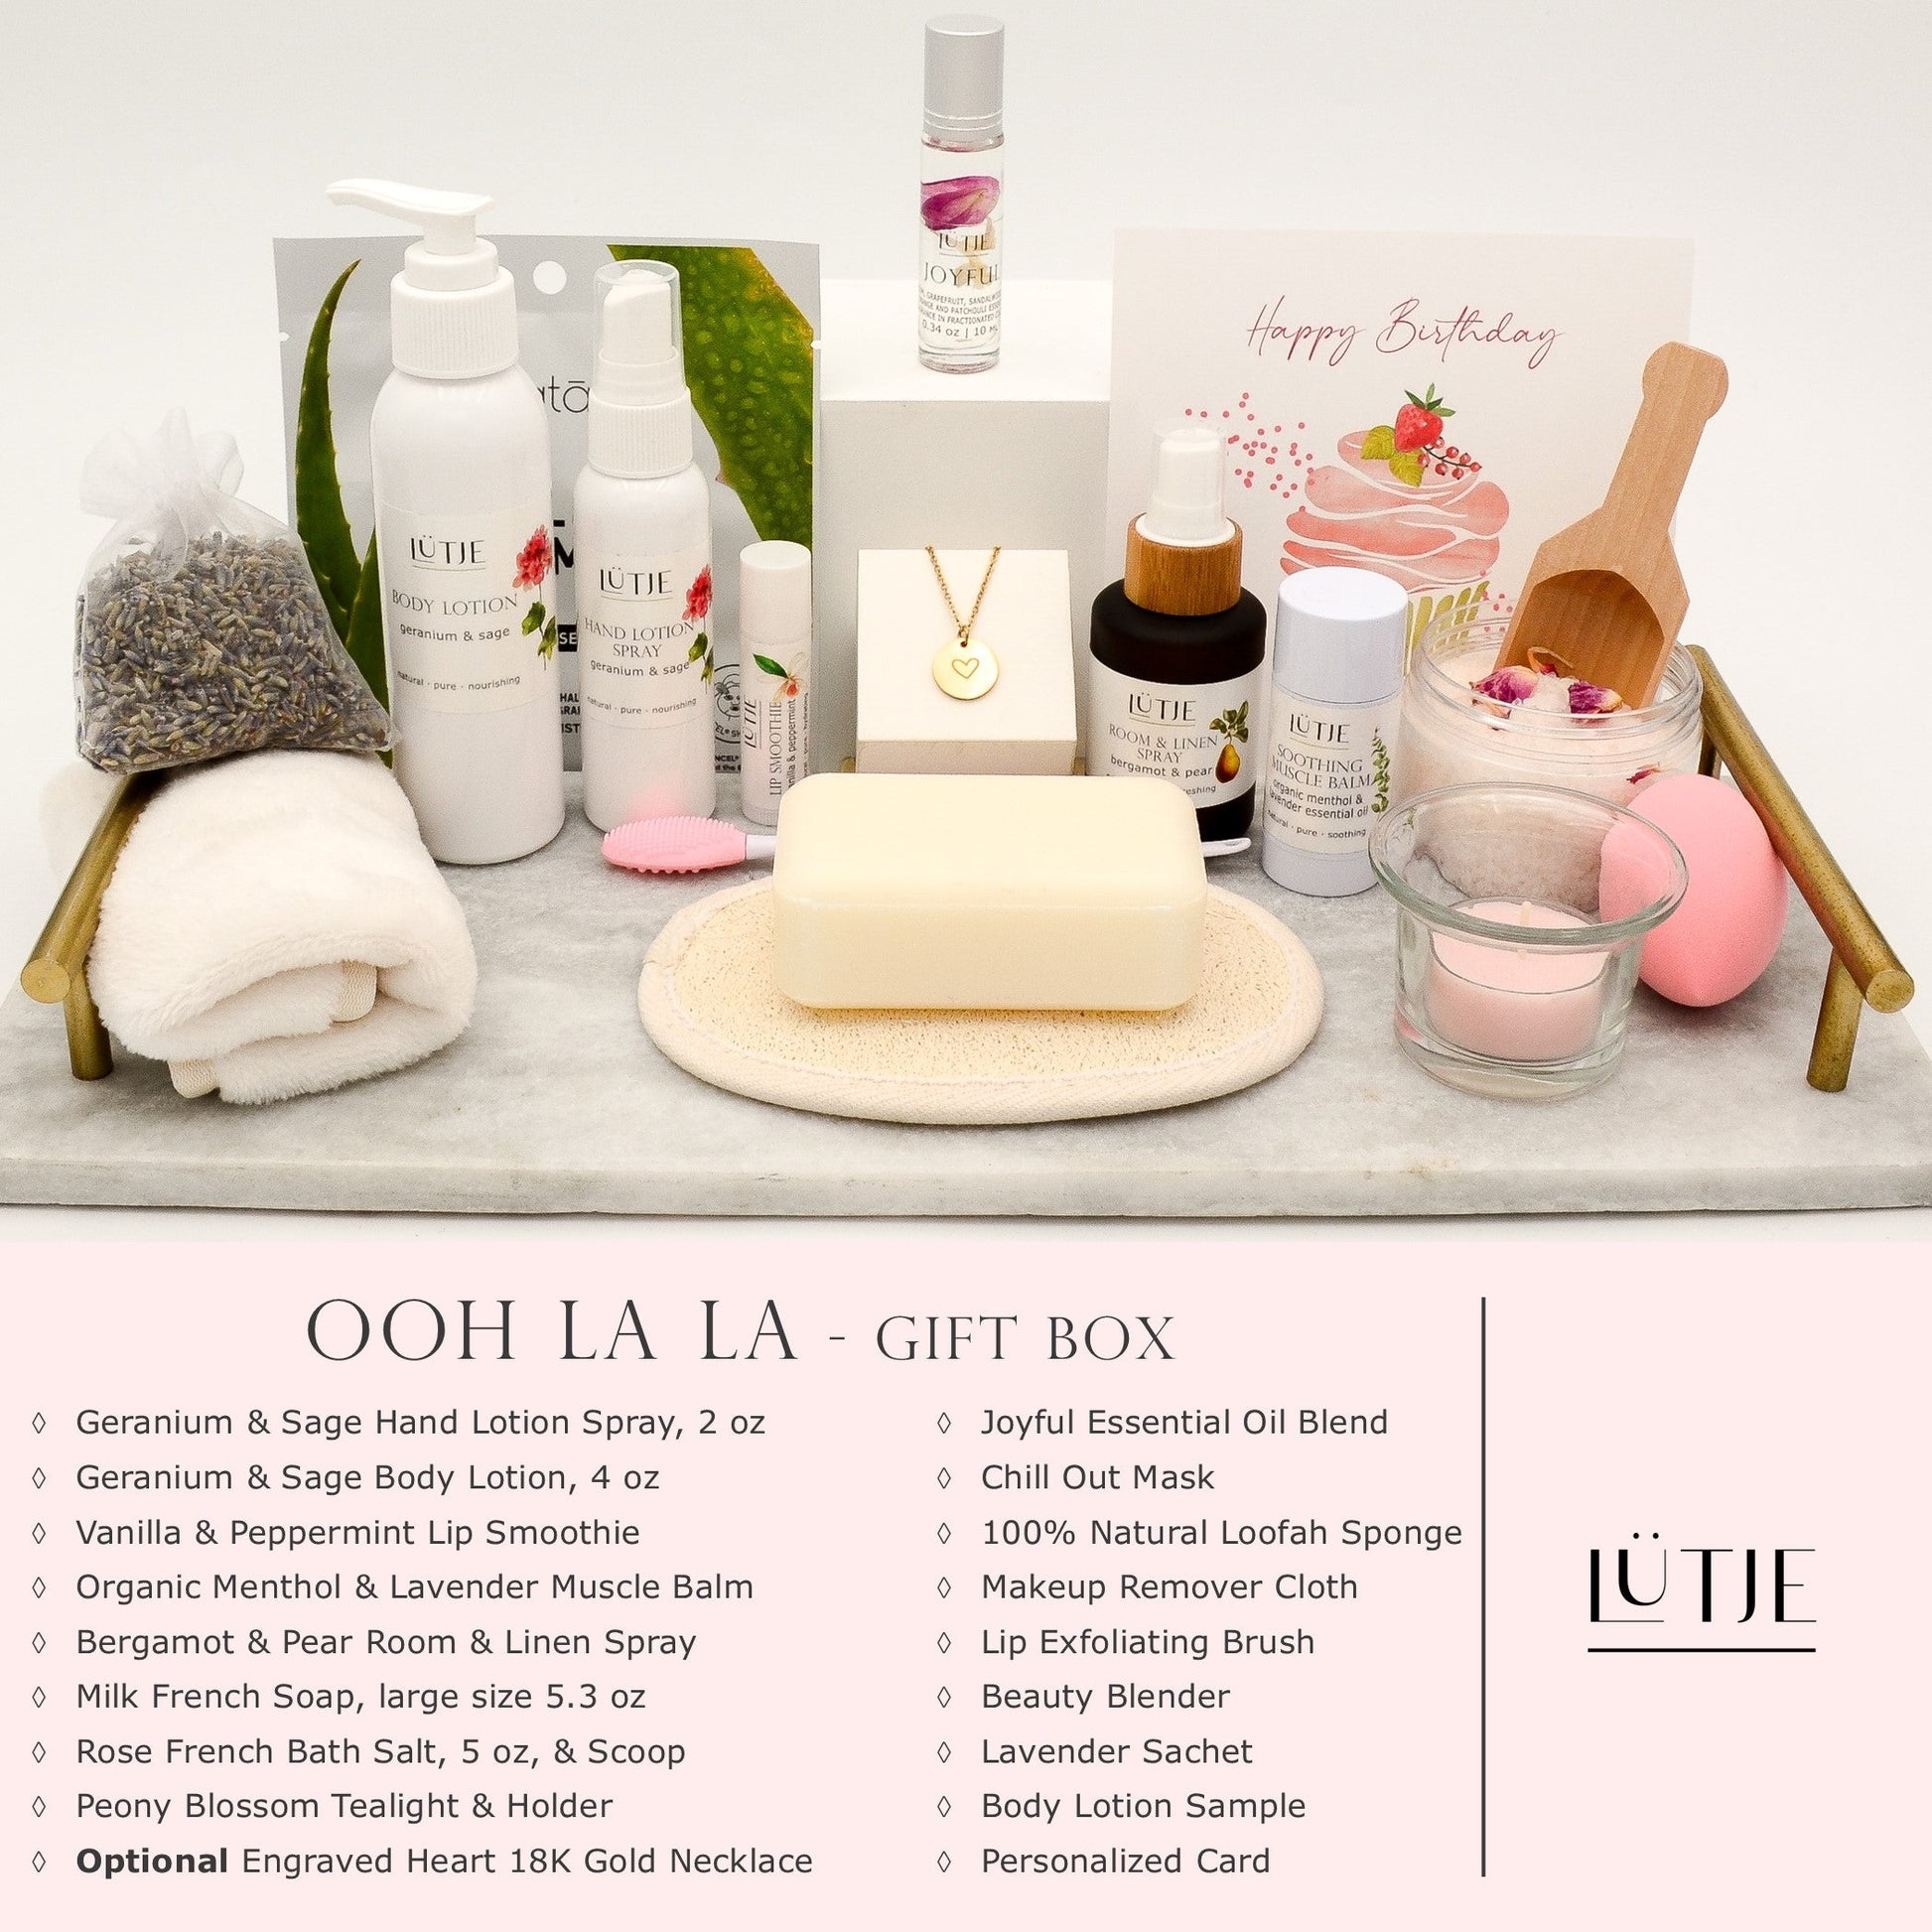 Ooh La La Gift Box for women, wife, daughter, BFF, sister, mom, or grandma, includes Geranium & Sage hand lotion spray and body lotion, essential oil, lip balm, soothing muscle balm, Bergamot & Pear room & linen spray, French soap, French bath salts, hydrating face mask, other bath, spa and self-care items, and 18K gold-plated necklace with engraved heart.